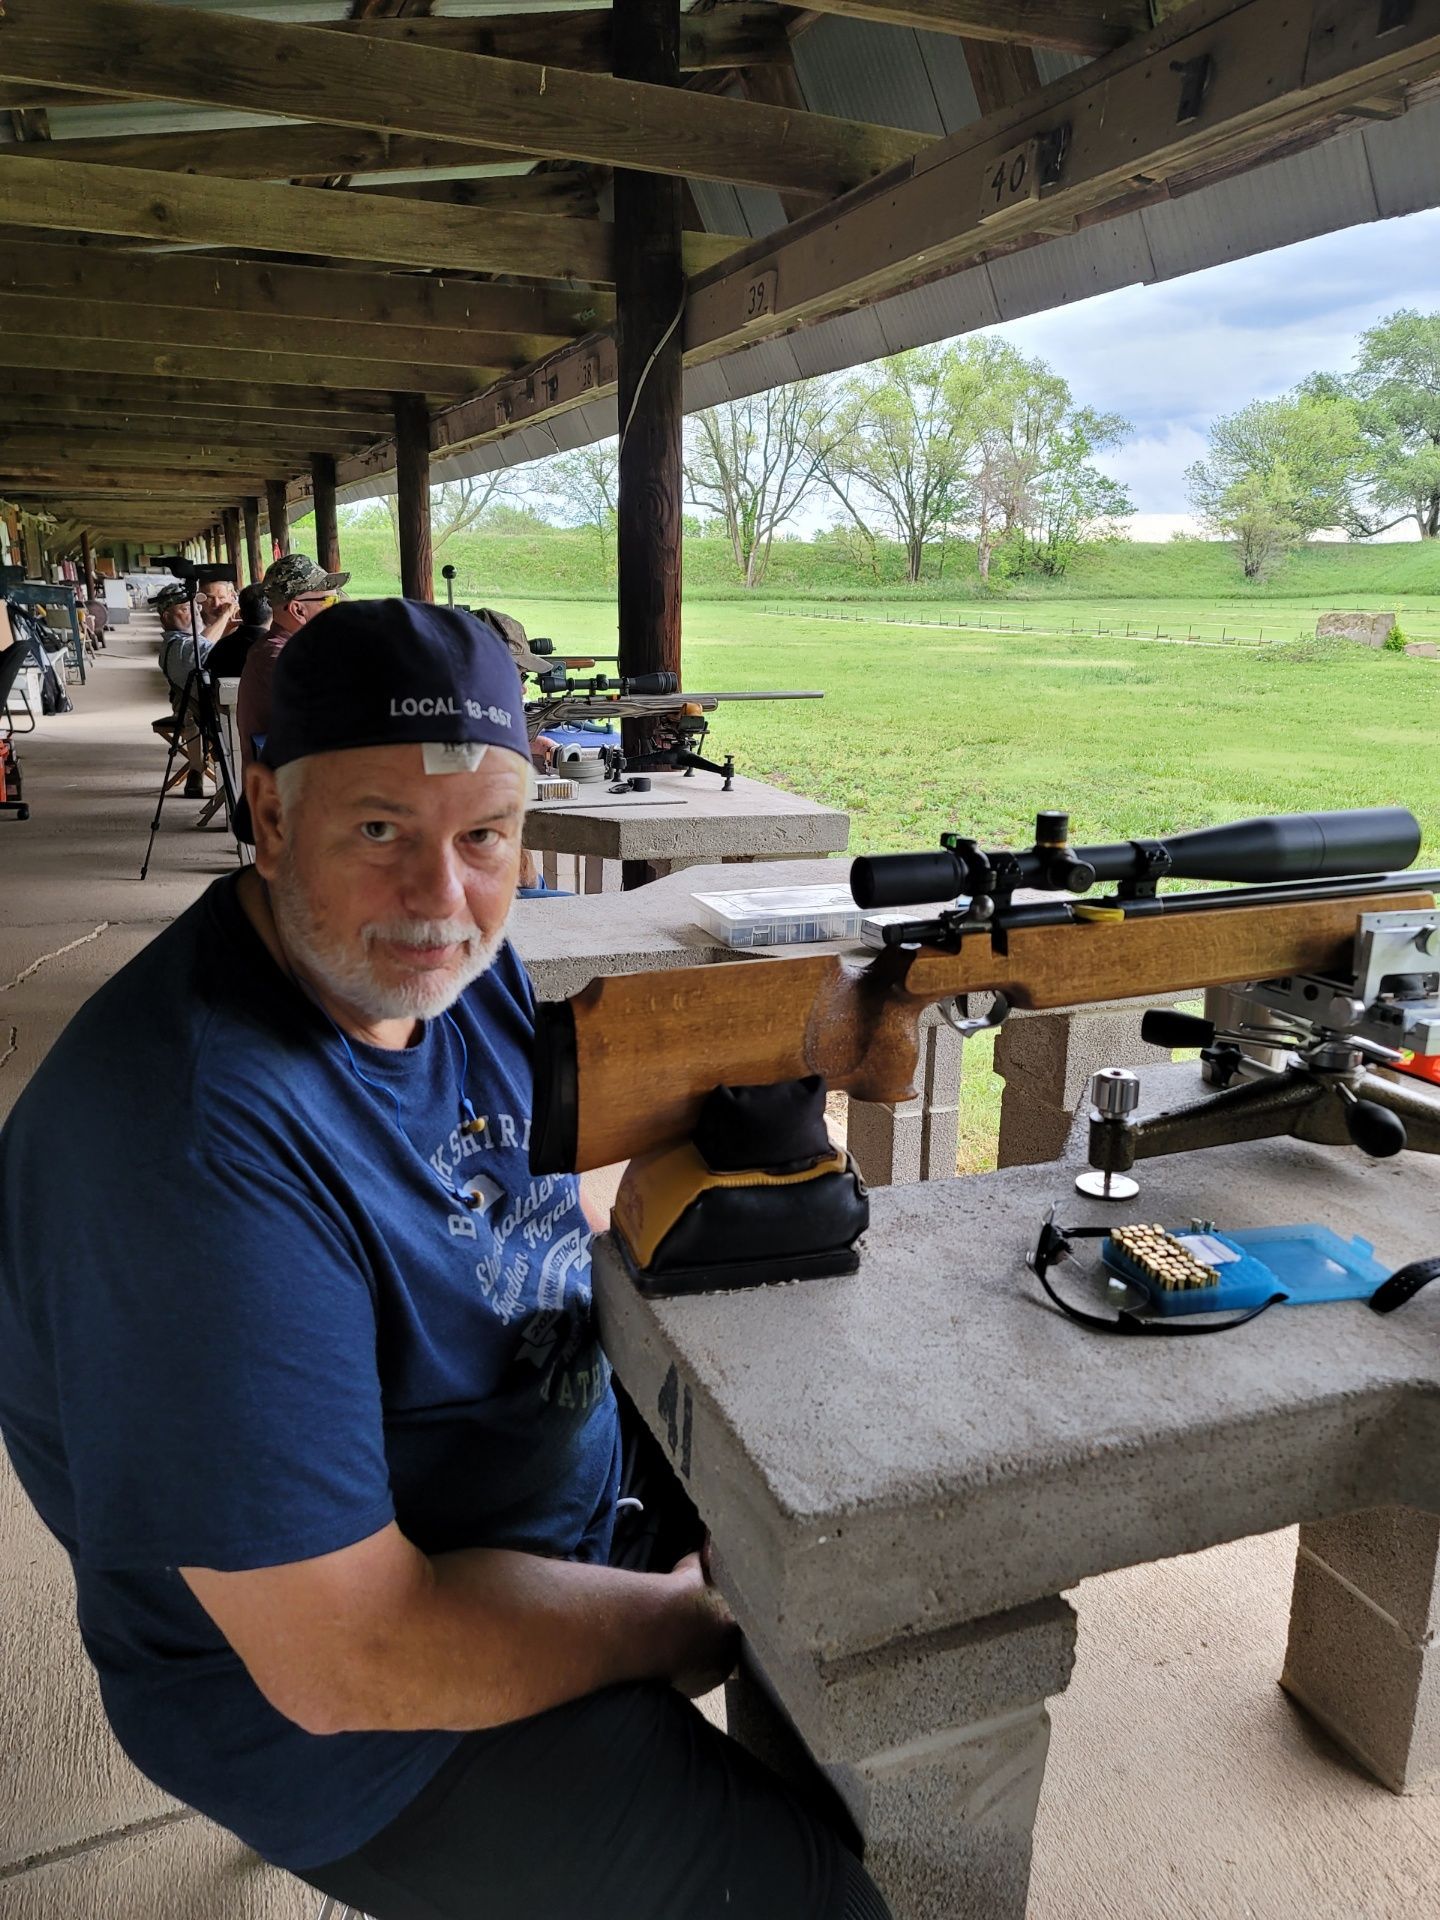 a man wearing a blue hat that says 'local ' on it sitting at gun range table